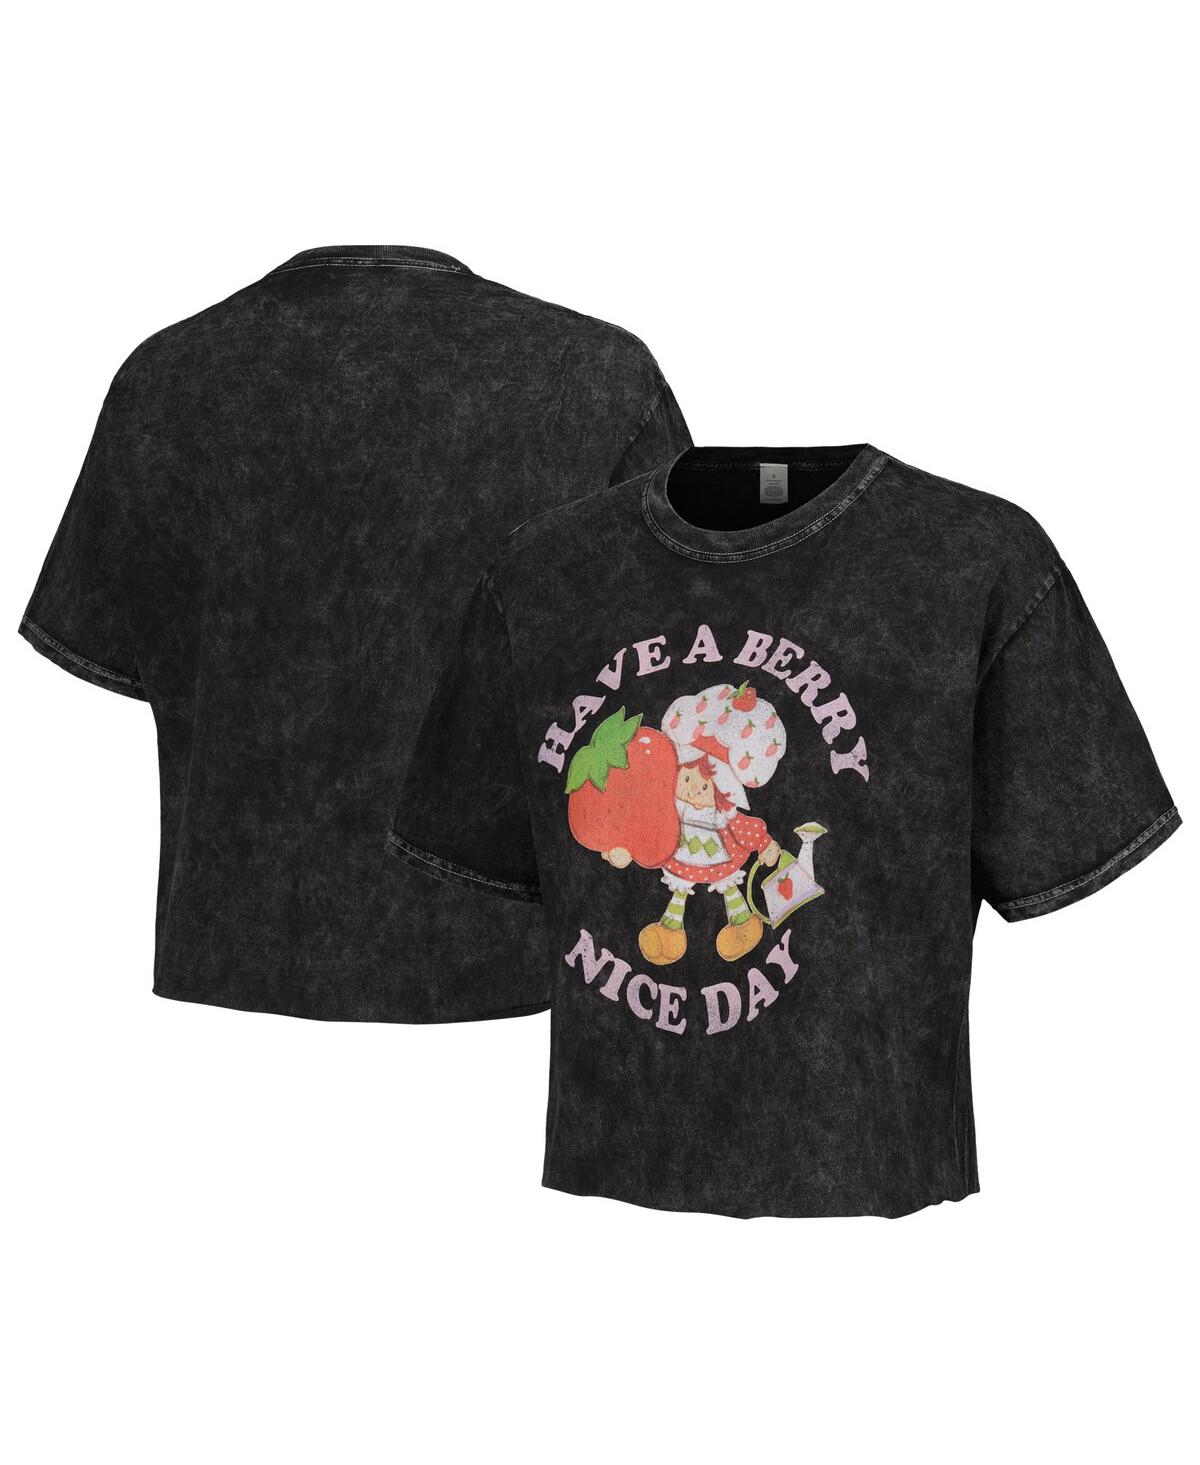 Men's and Women's Mad Engine Black Strawberry Shortcake Have A Berry Nice Day T-shirt - Black